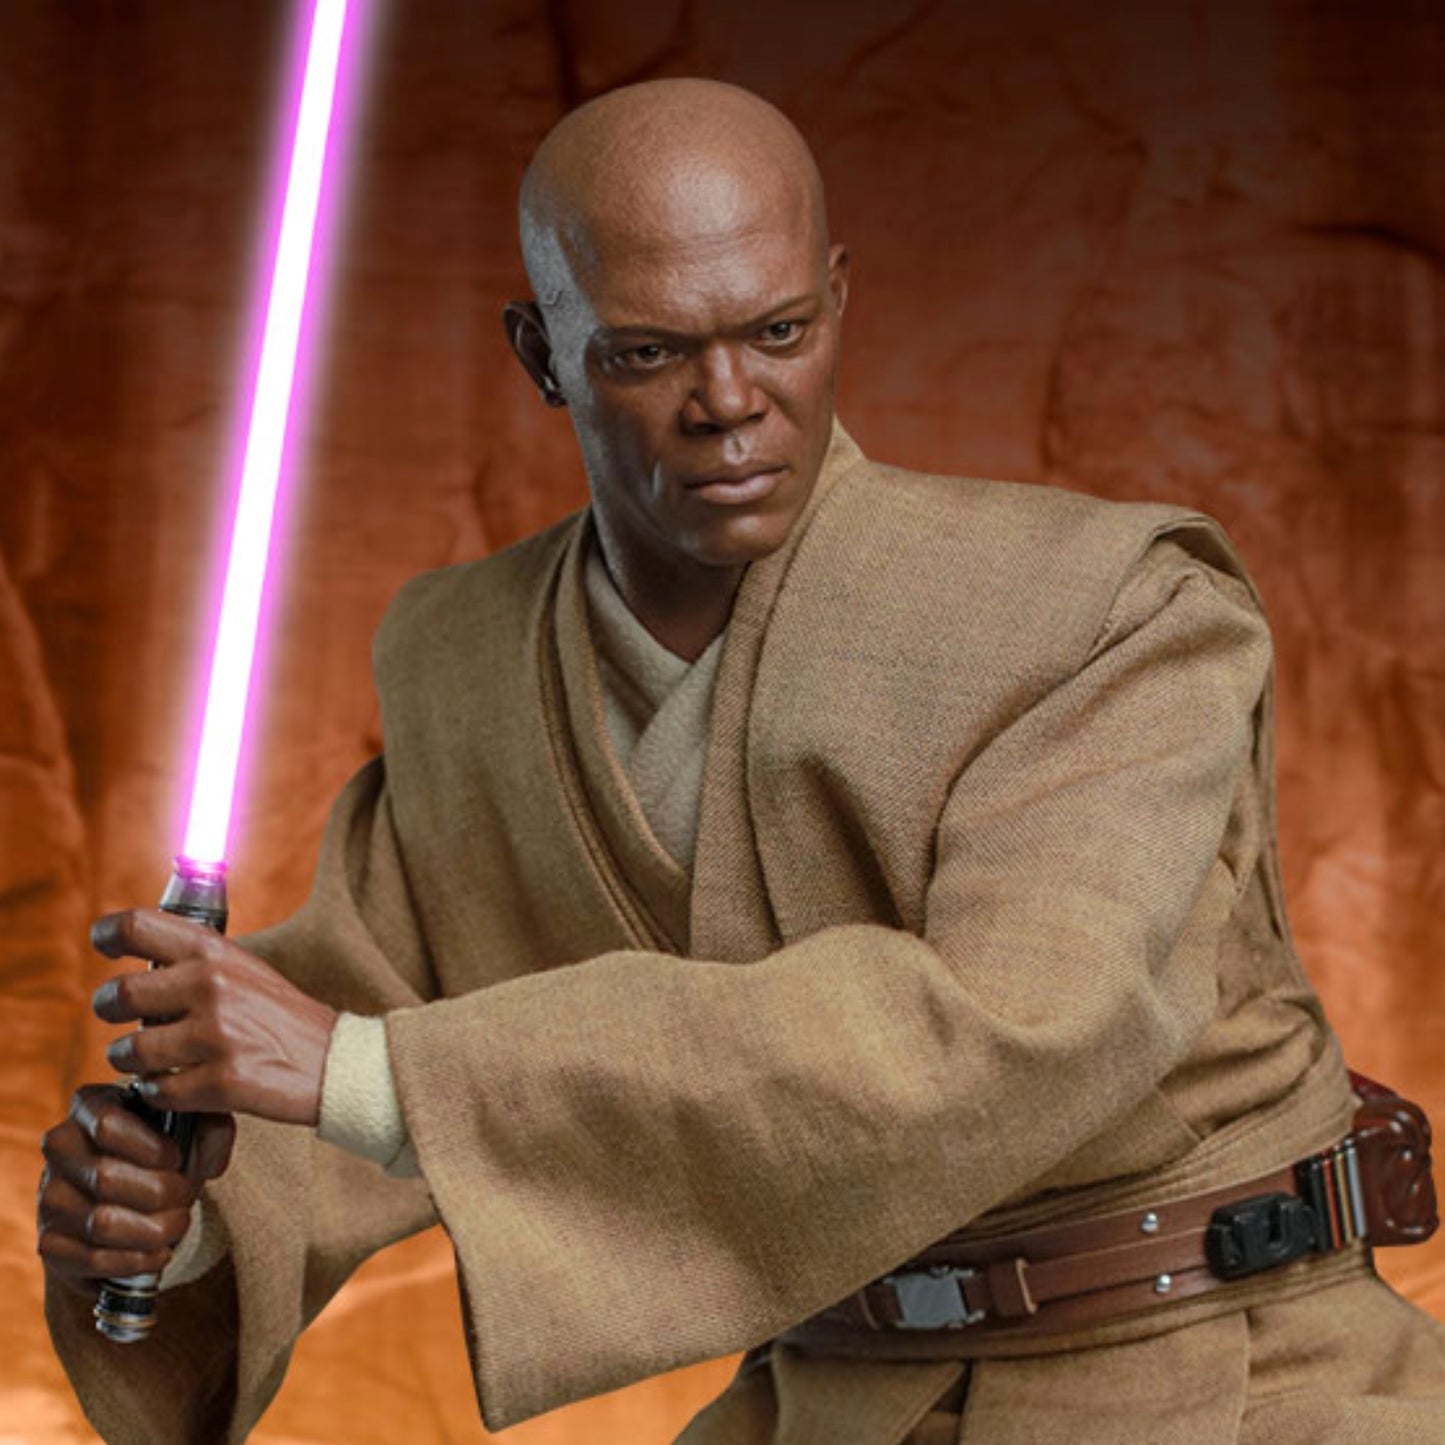 Load image into Gallery viewer, Mace Windu (Star Wars: Attack of the Clones) 1:6 Figure by Hot Toys
